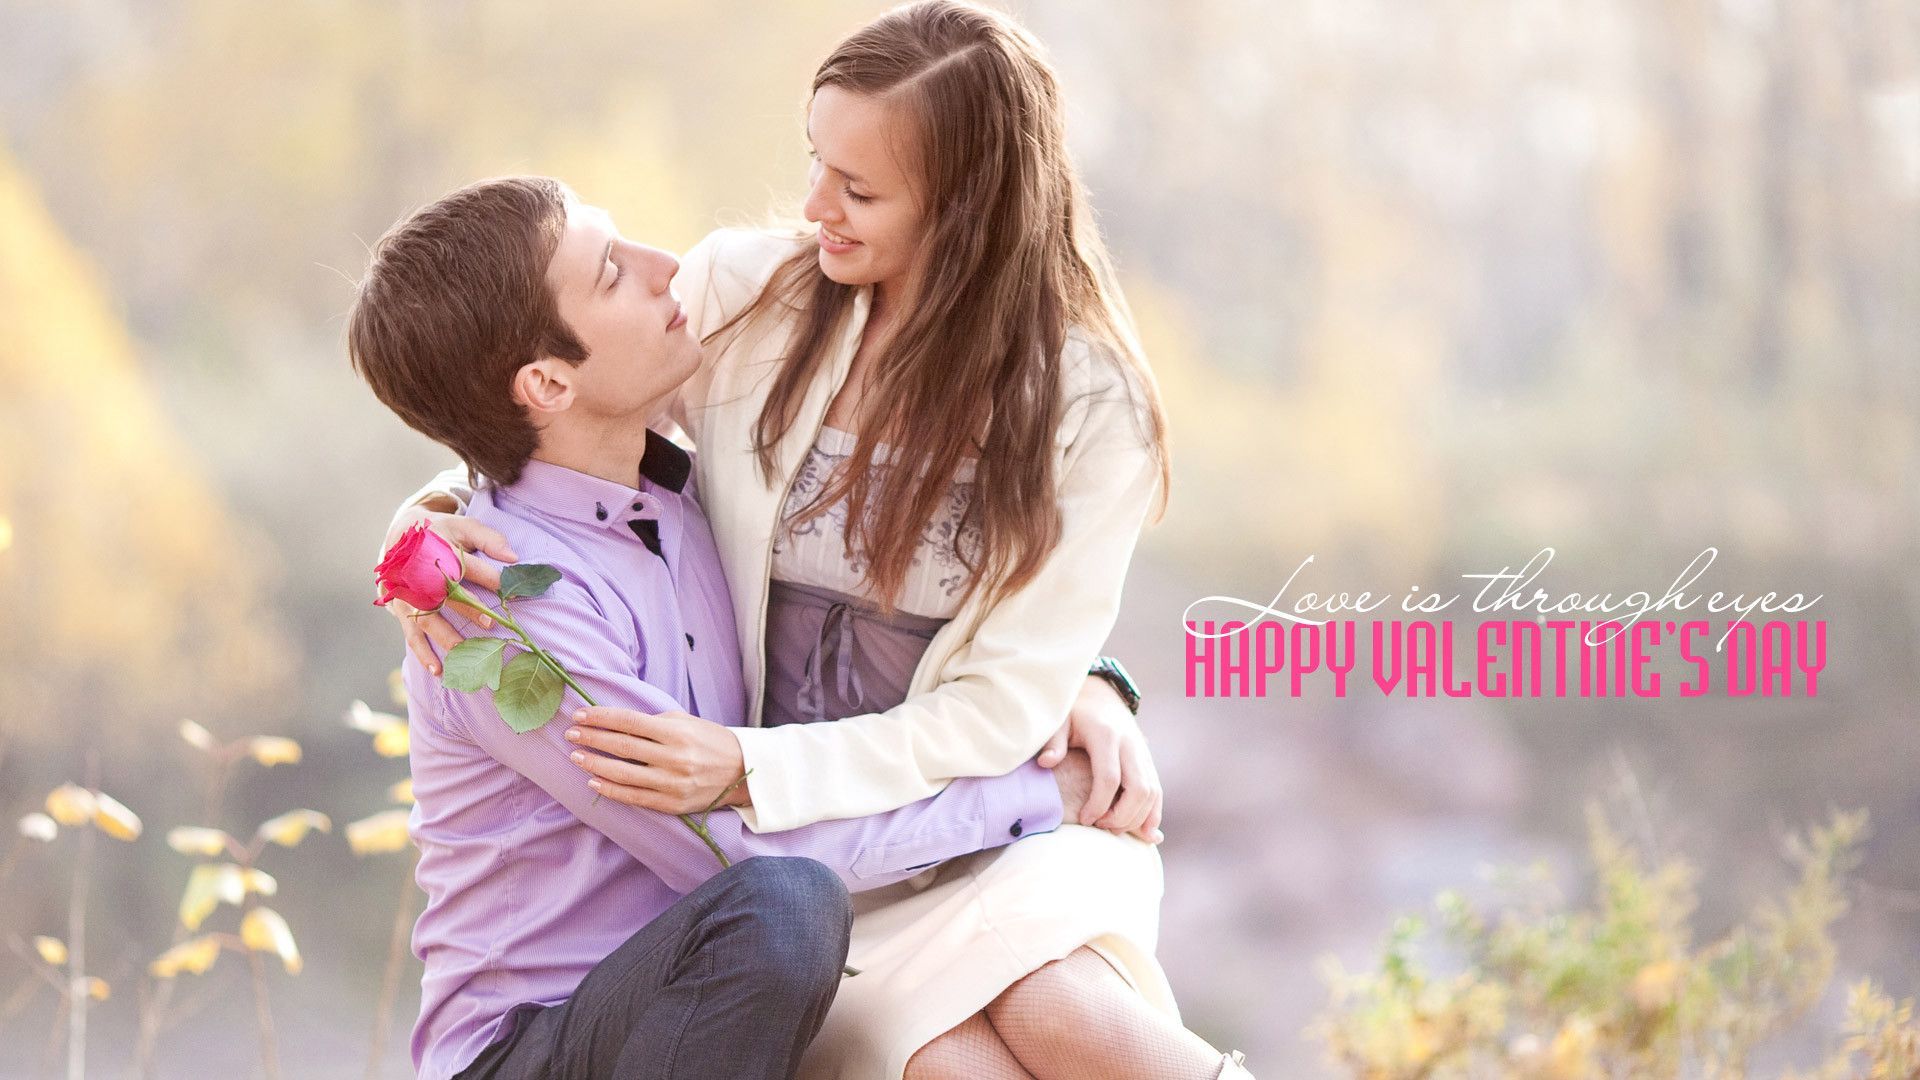 Cute Love Couple Wallpaper - Happy Valentines Day Couple , HD Wallpaper & Backgrounds